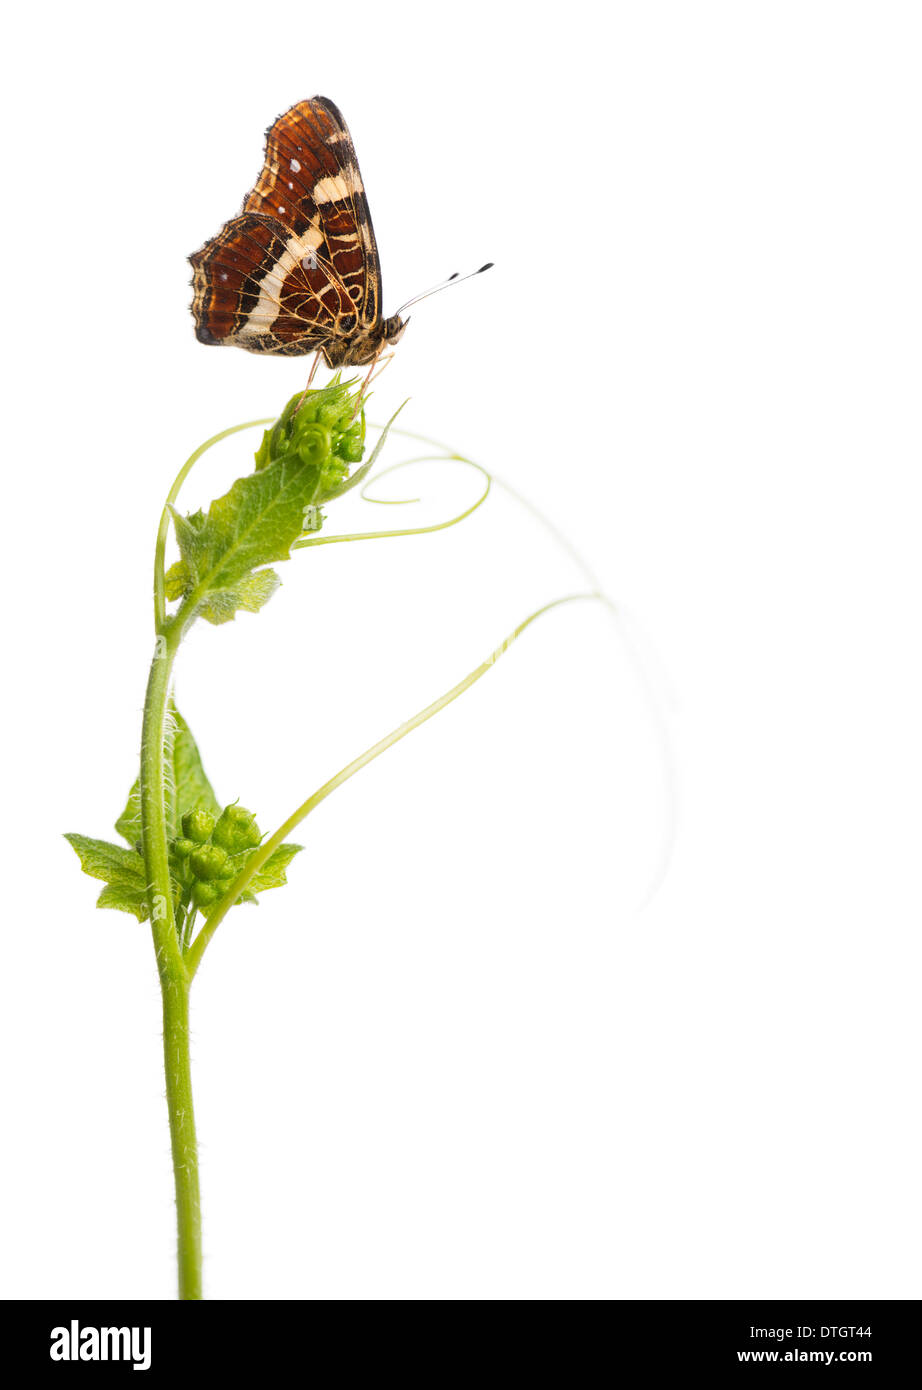 Side view of a Map butterfly on wild plant, Araschnia levana, in front of white background Stock Photo